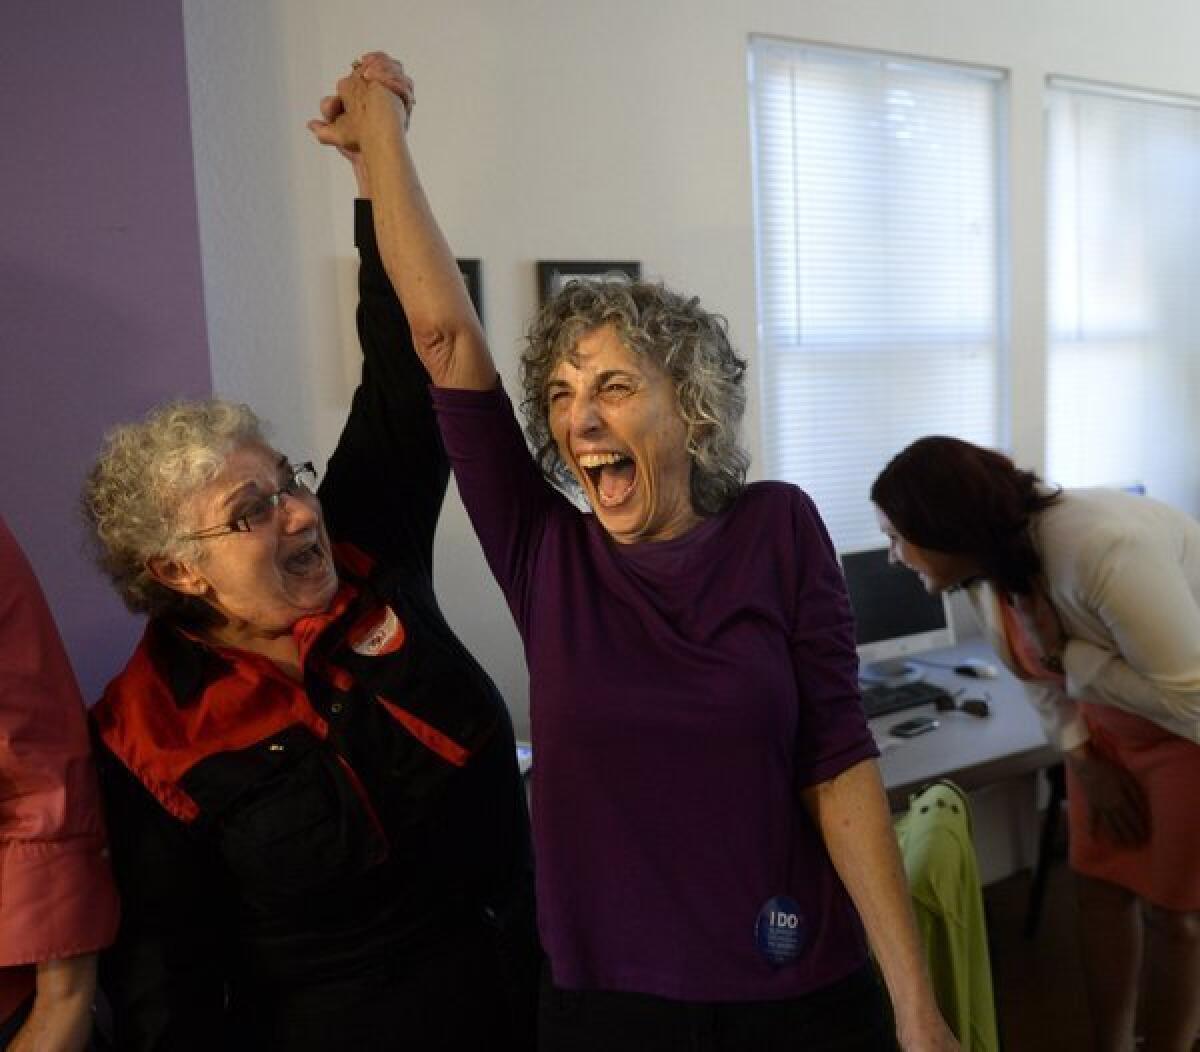 Shelly Bailes, left, and her wife, Ellen Pontac, celebrate in Sacramento after hearing that the Supreme Court struck down the Defense of Marriage Act.